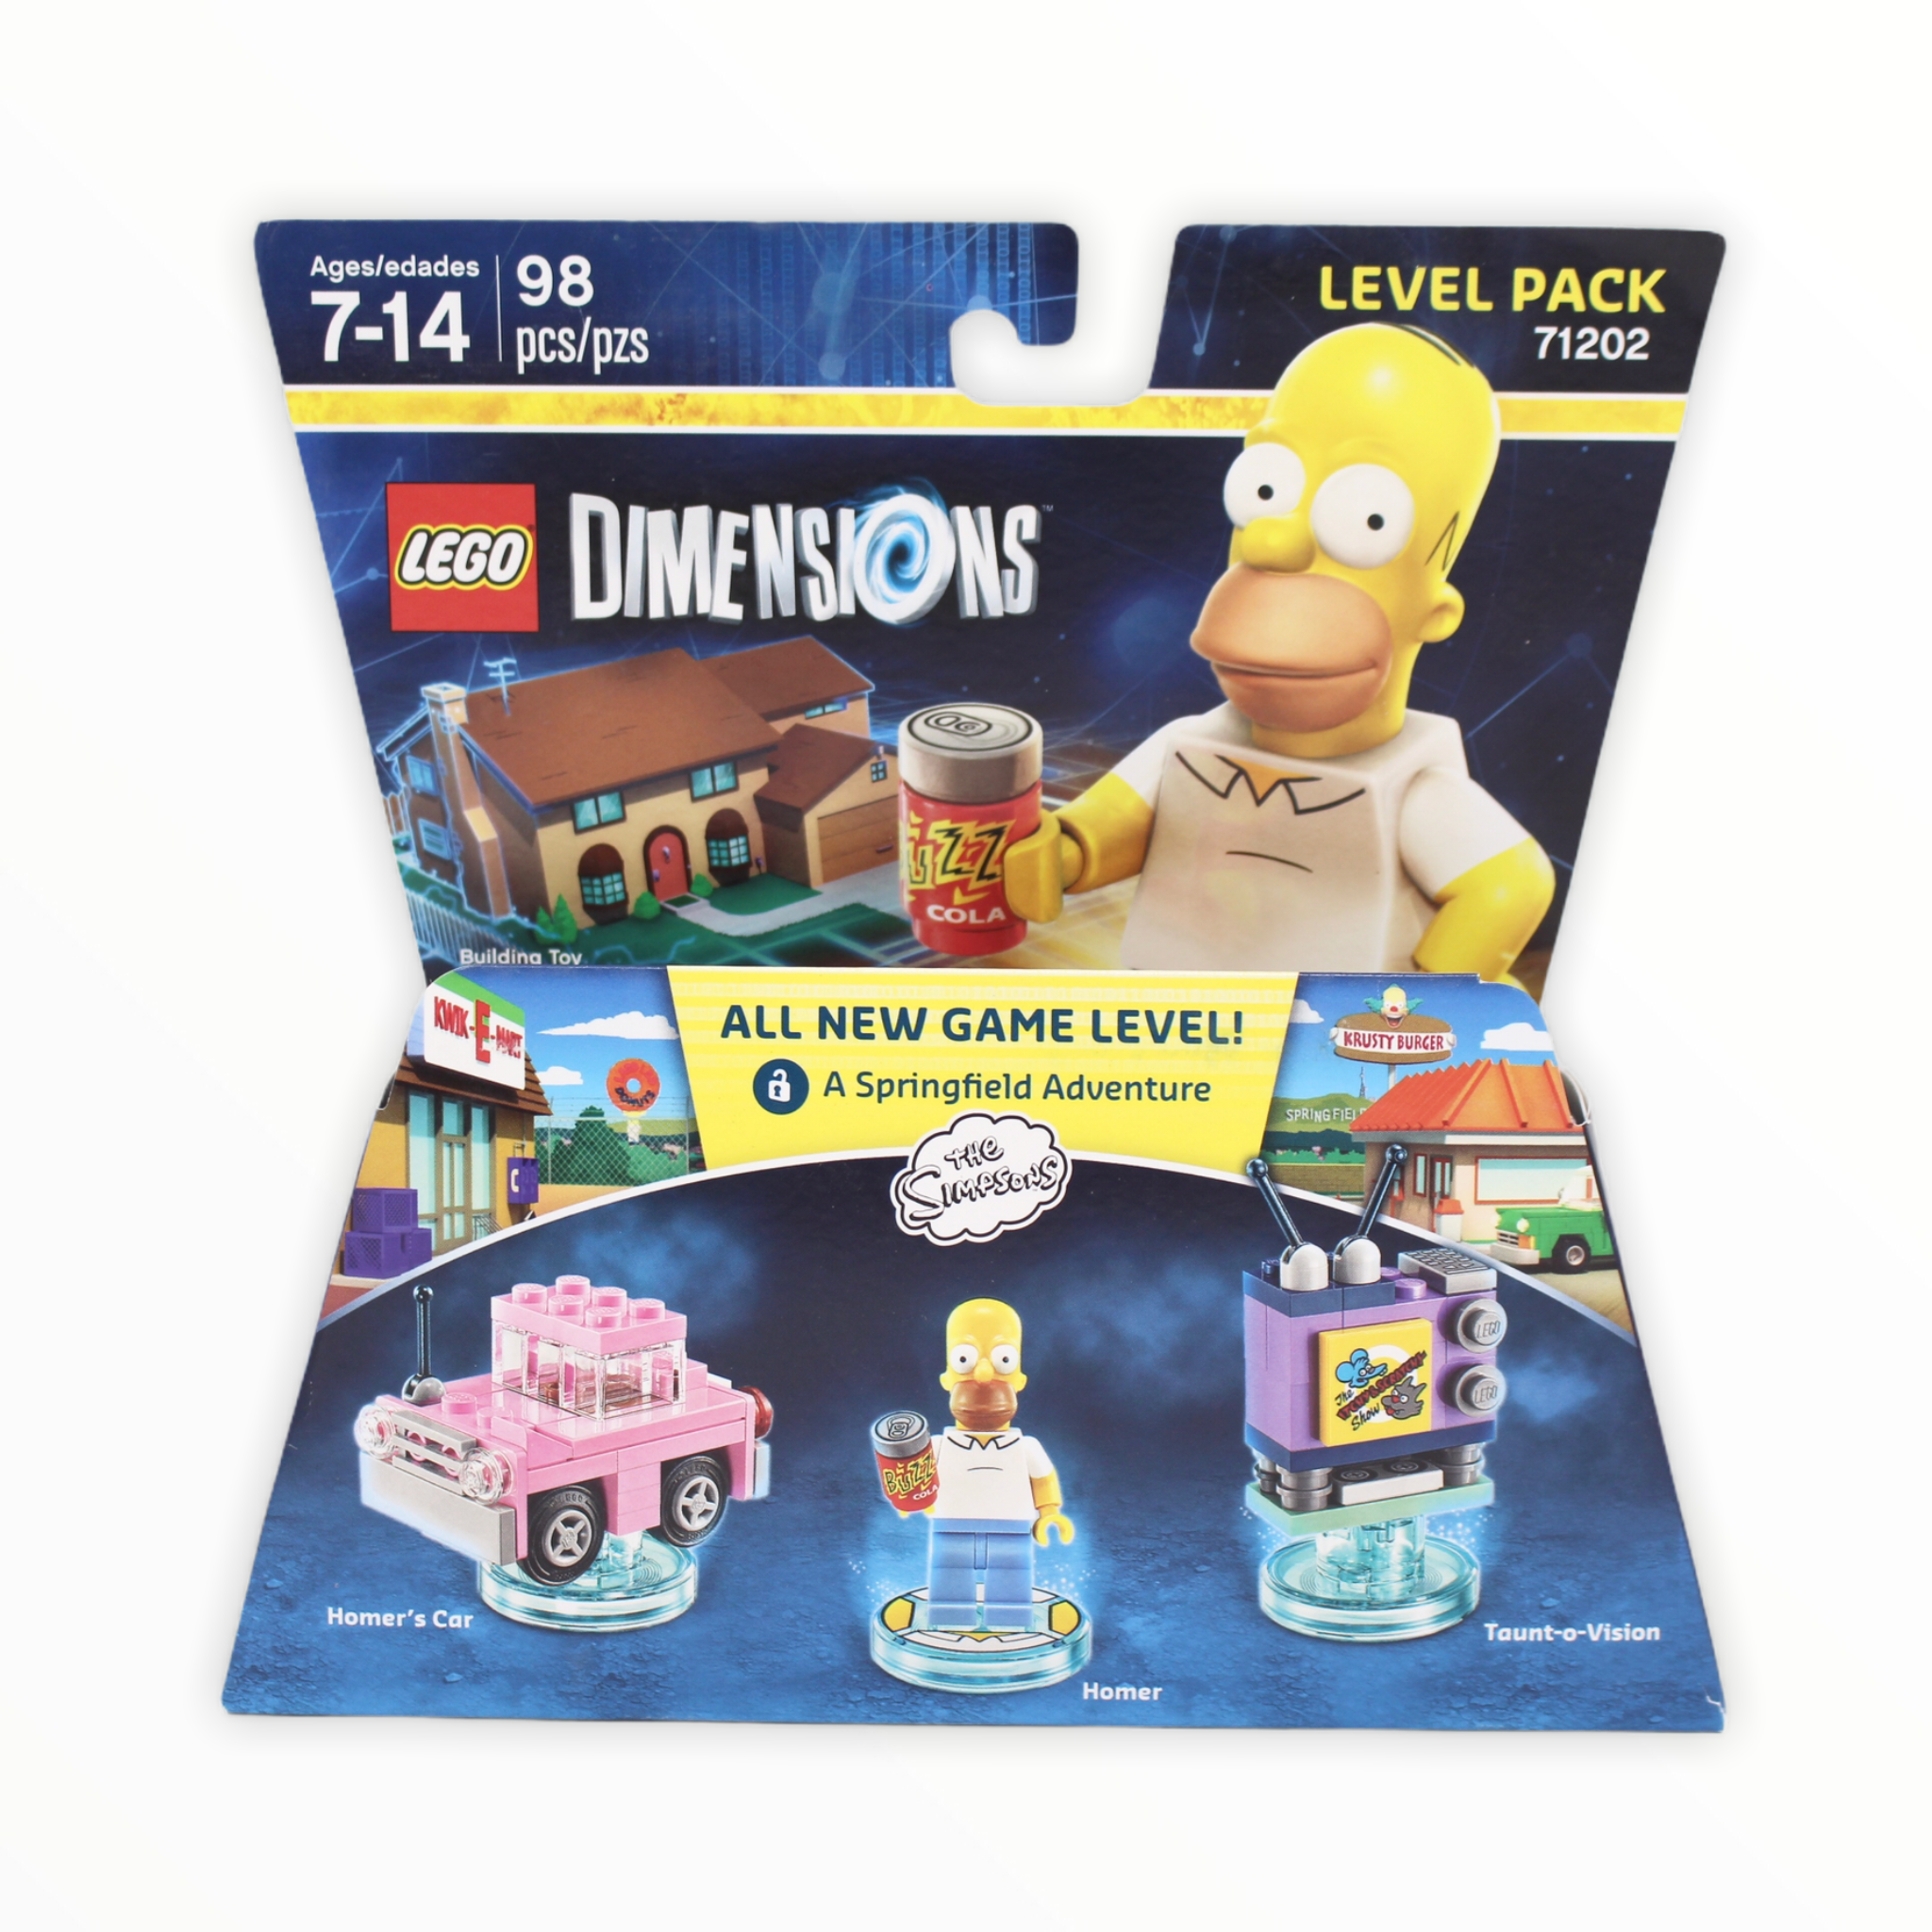 Retired Set 71202 Dimensions Level Pack - The Simpsons